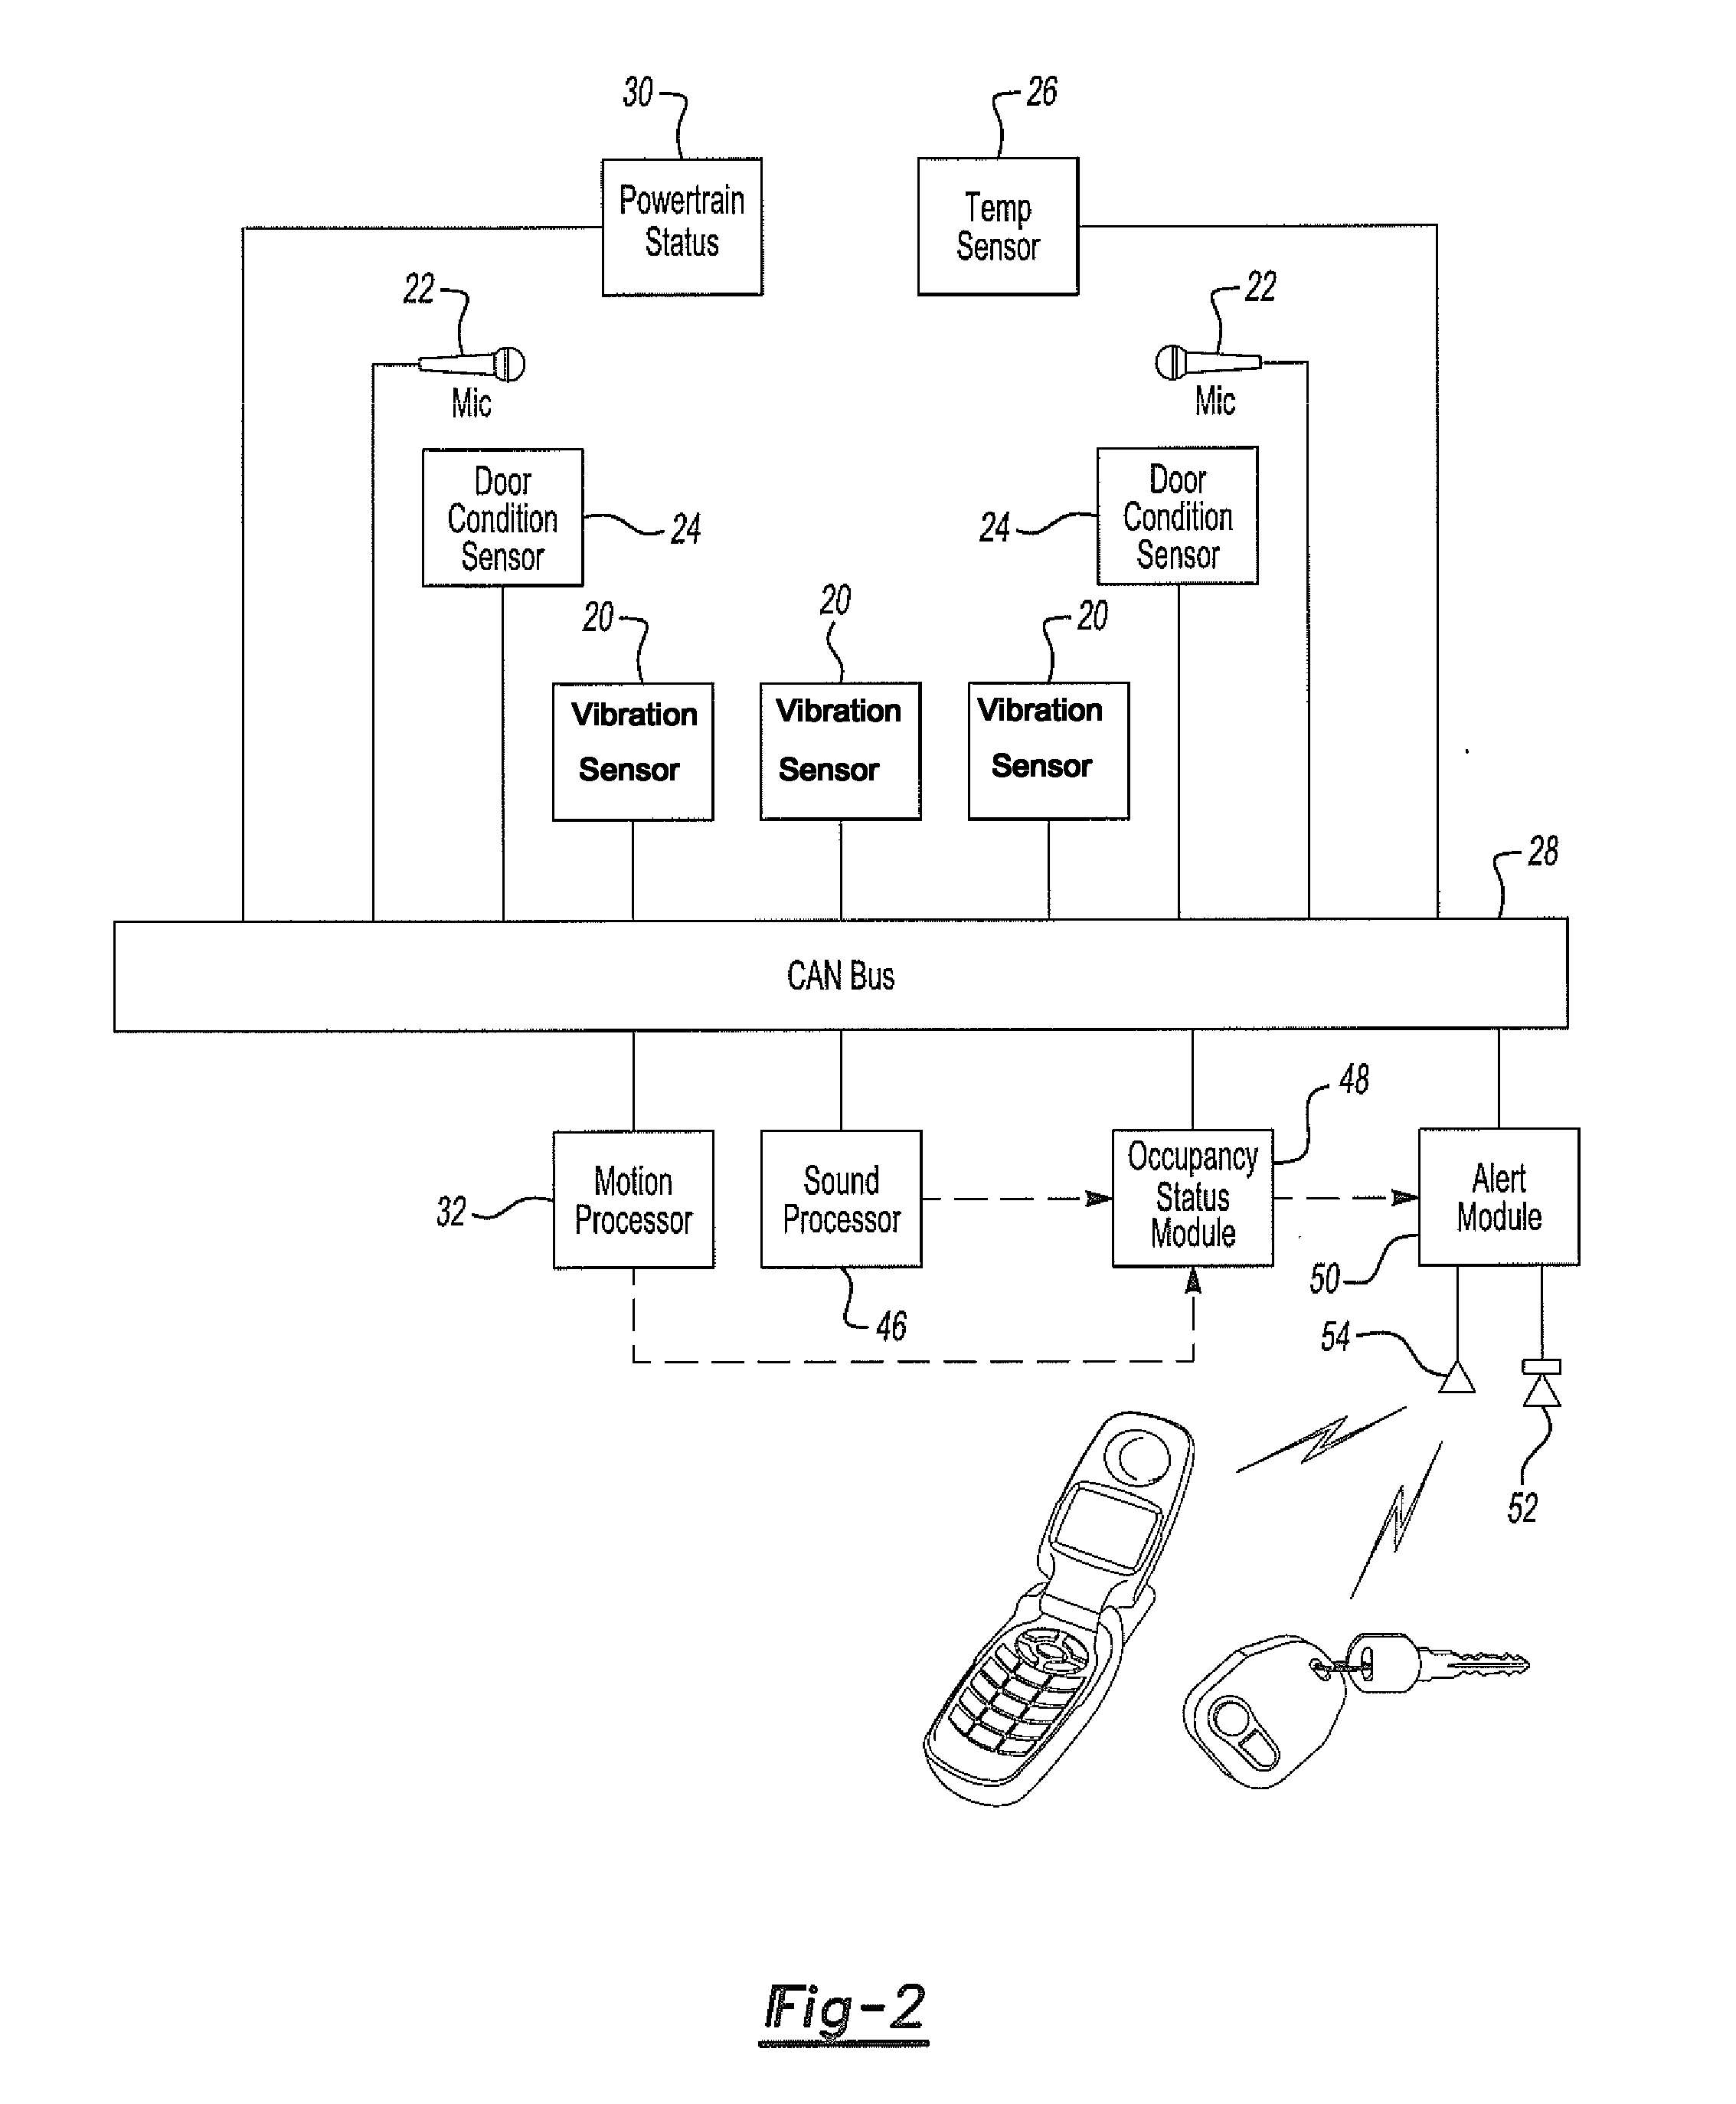 Method and apparatus for in-vehicle presence detection and driver alerting